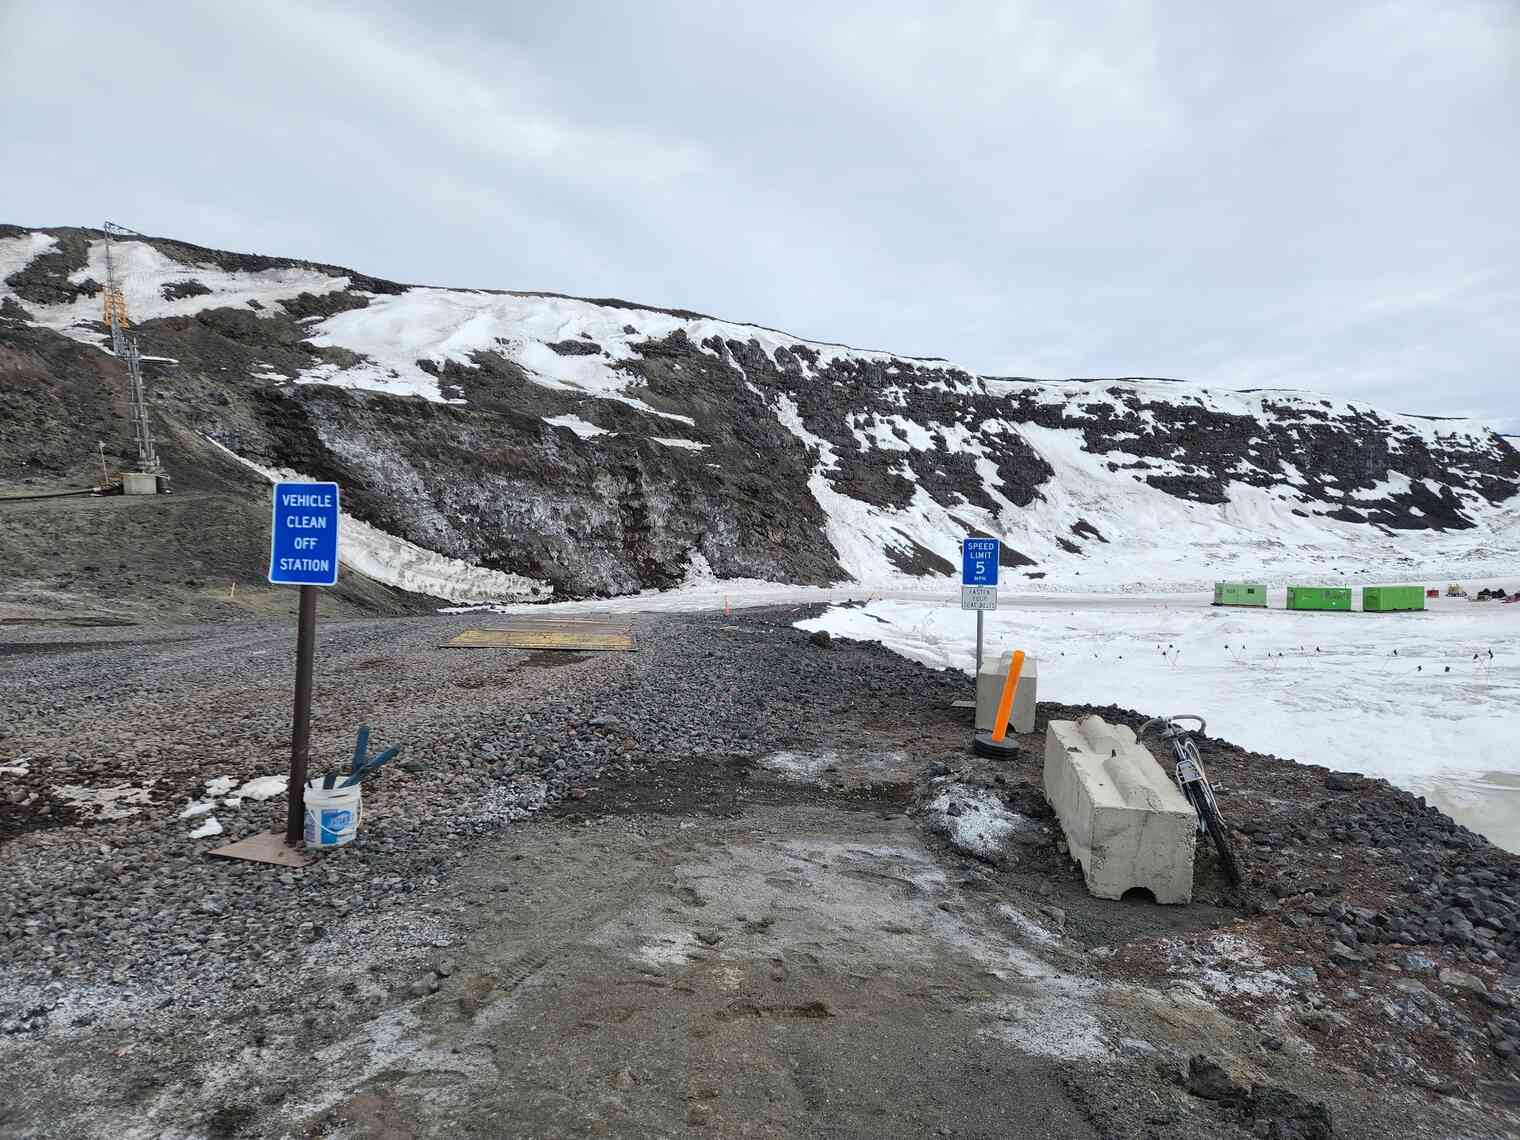 McMurdo Vehicle Cleaning Station